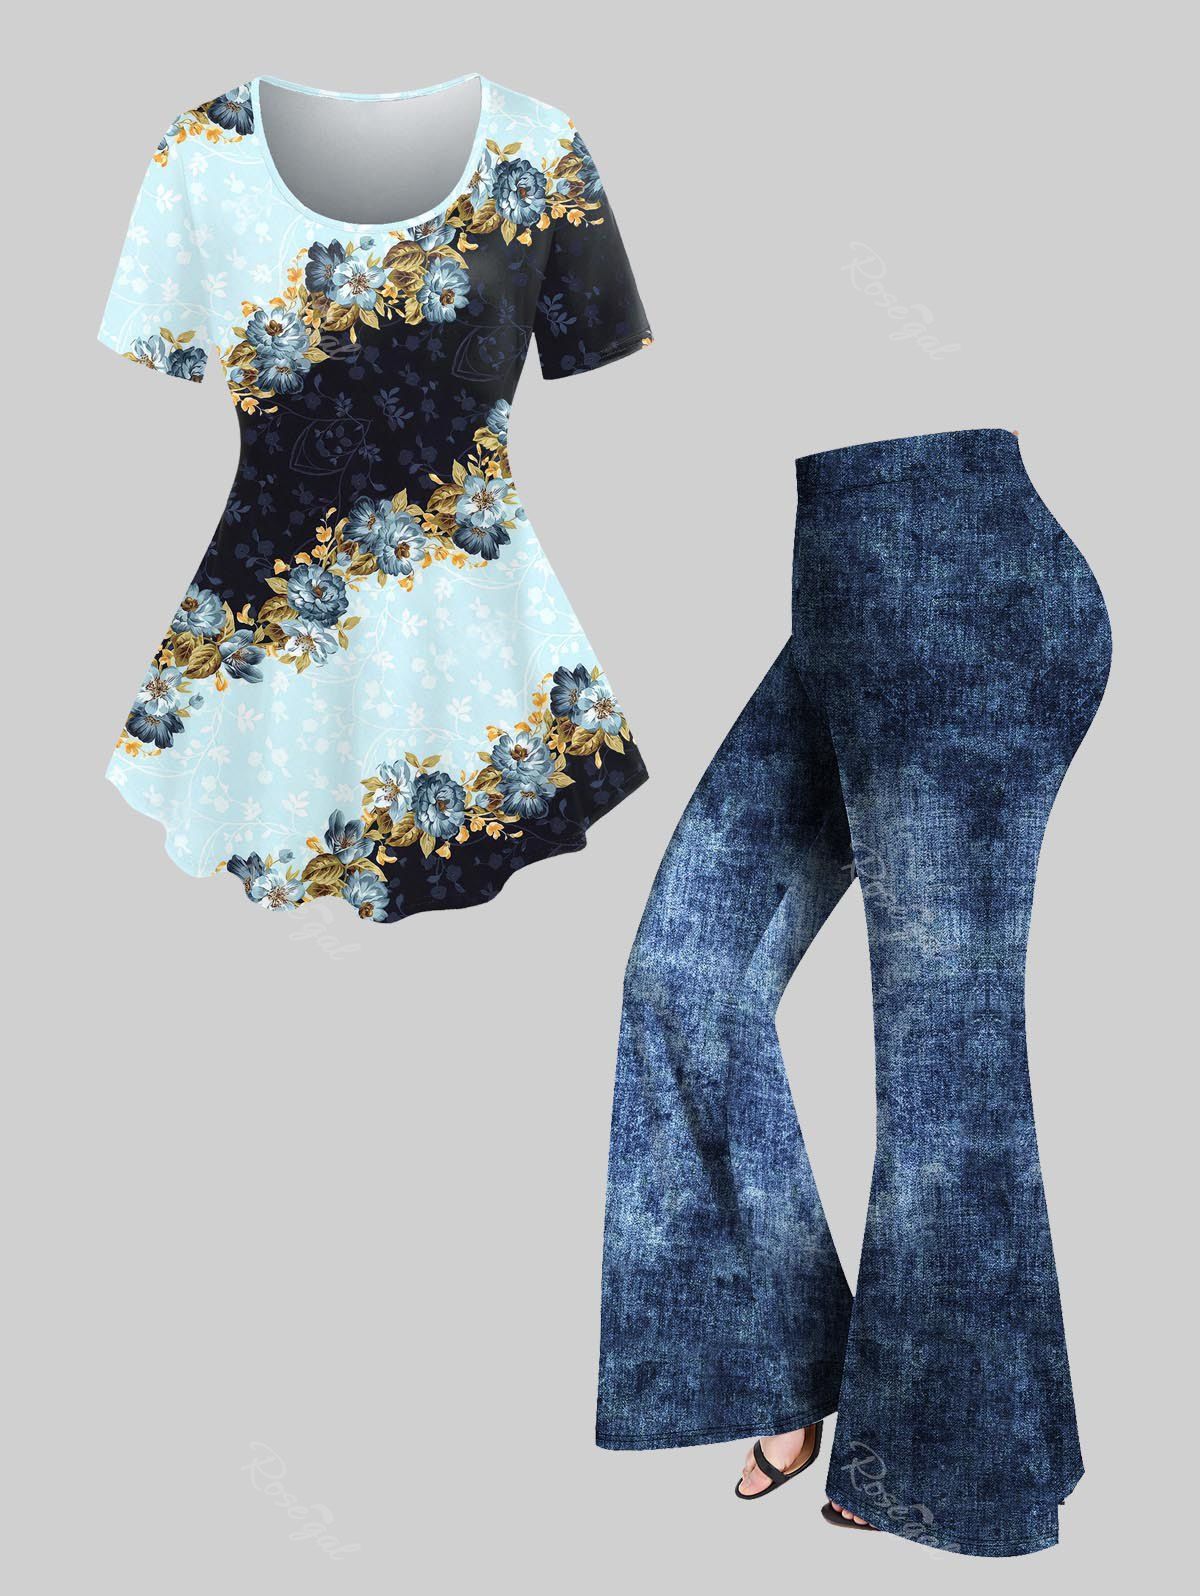 Hot Vintage Floral Print T-shirt and 3D Jean Print Pull On Flare Pants Plus Size Outfits  